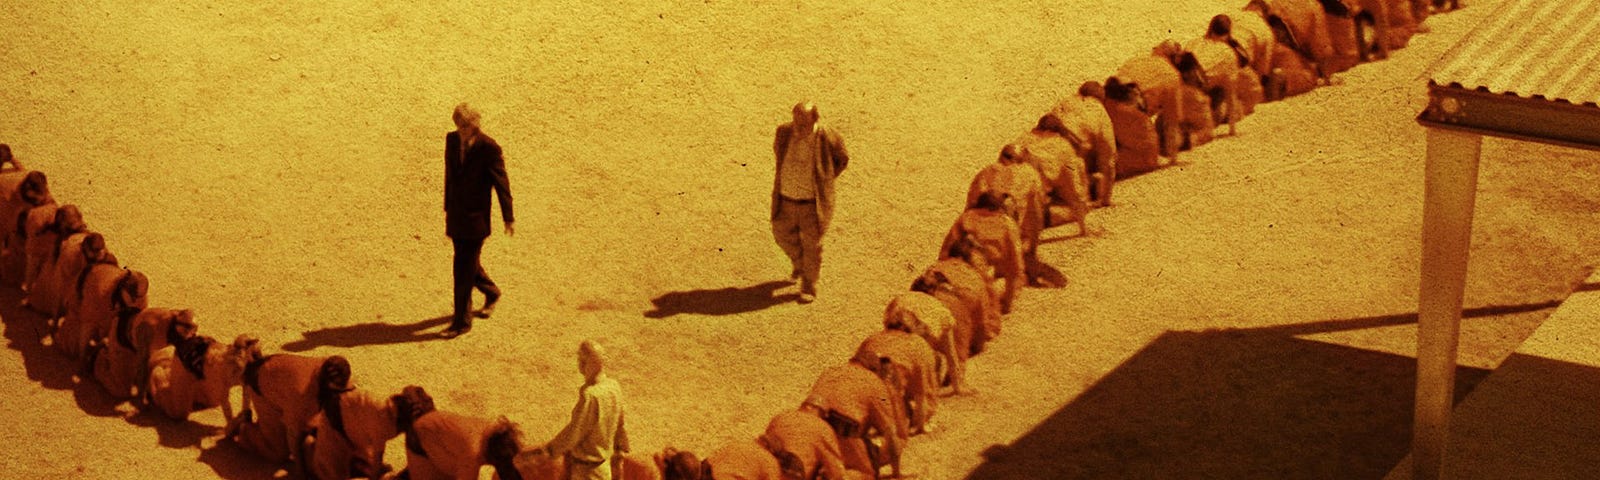 Movie Review: The Human Centipede III (Final Sequence) - (2015) .